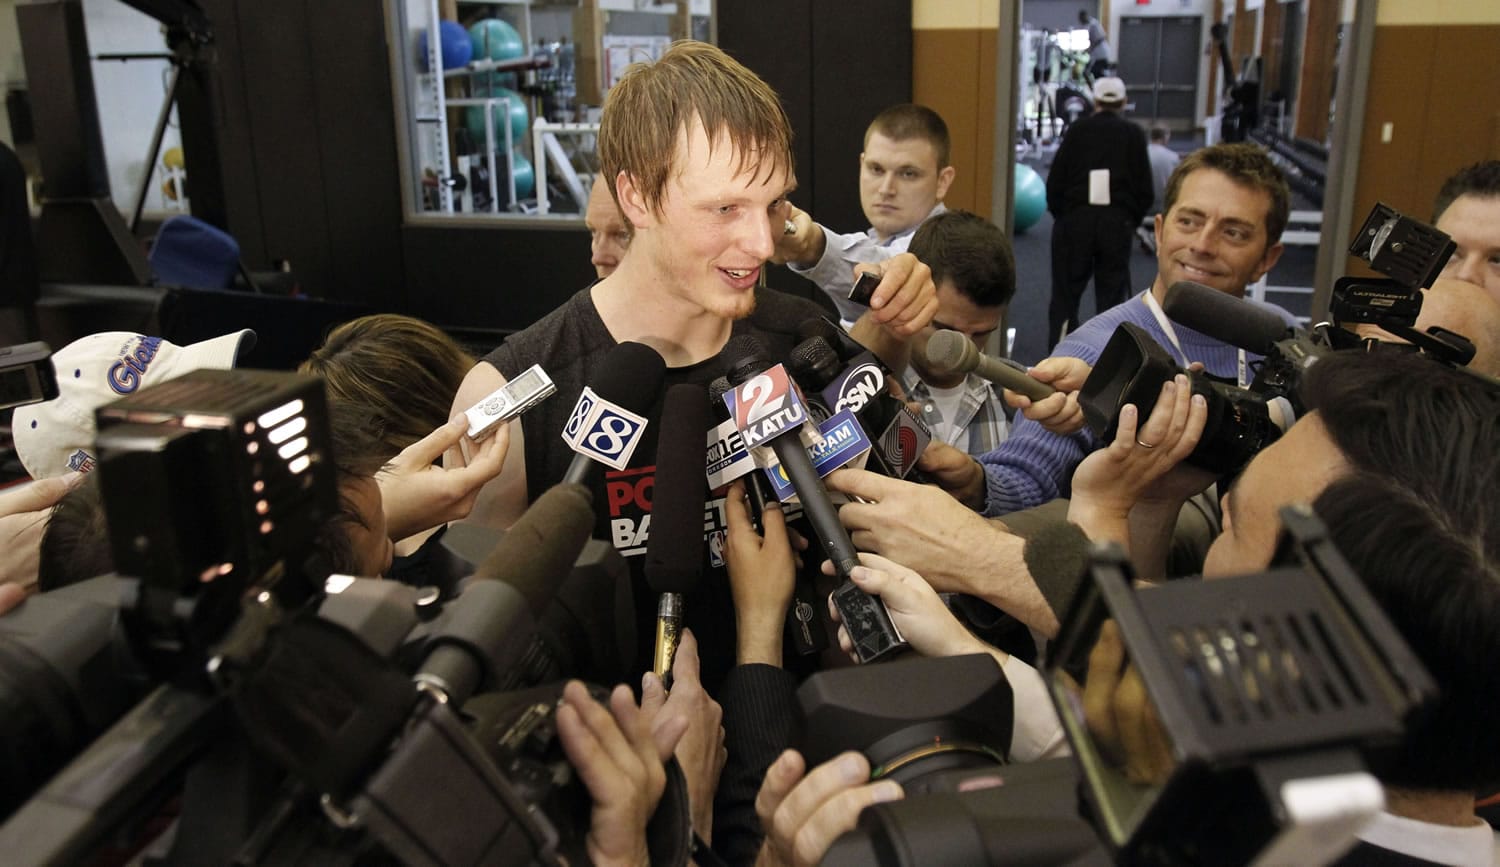 Former Duke forward Kyle Singler is surrounded by media after a pre-draft basketball workout at the Portland Trail Blazers practice facility in Tualatin, Ore., on Thursday.